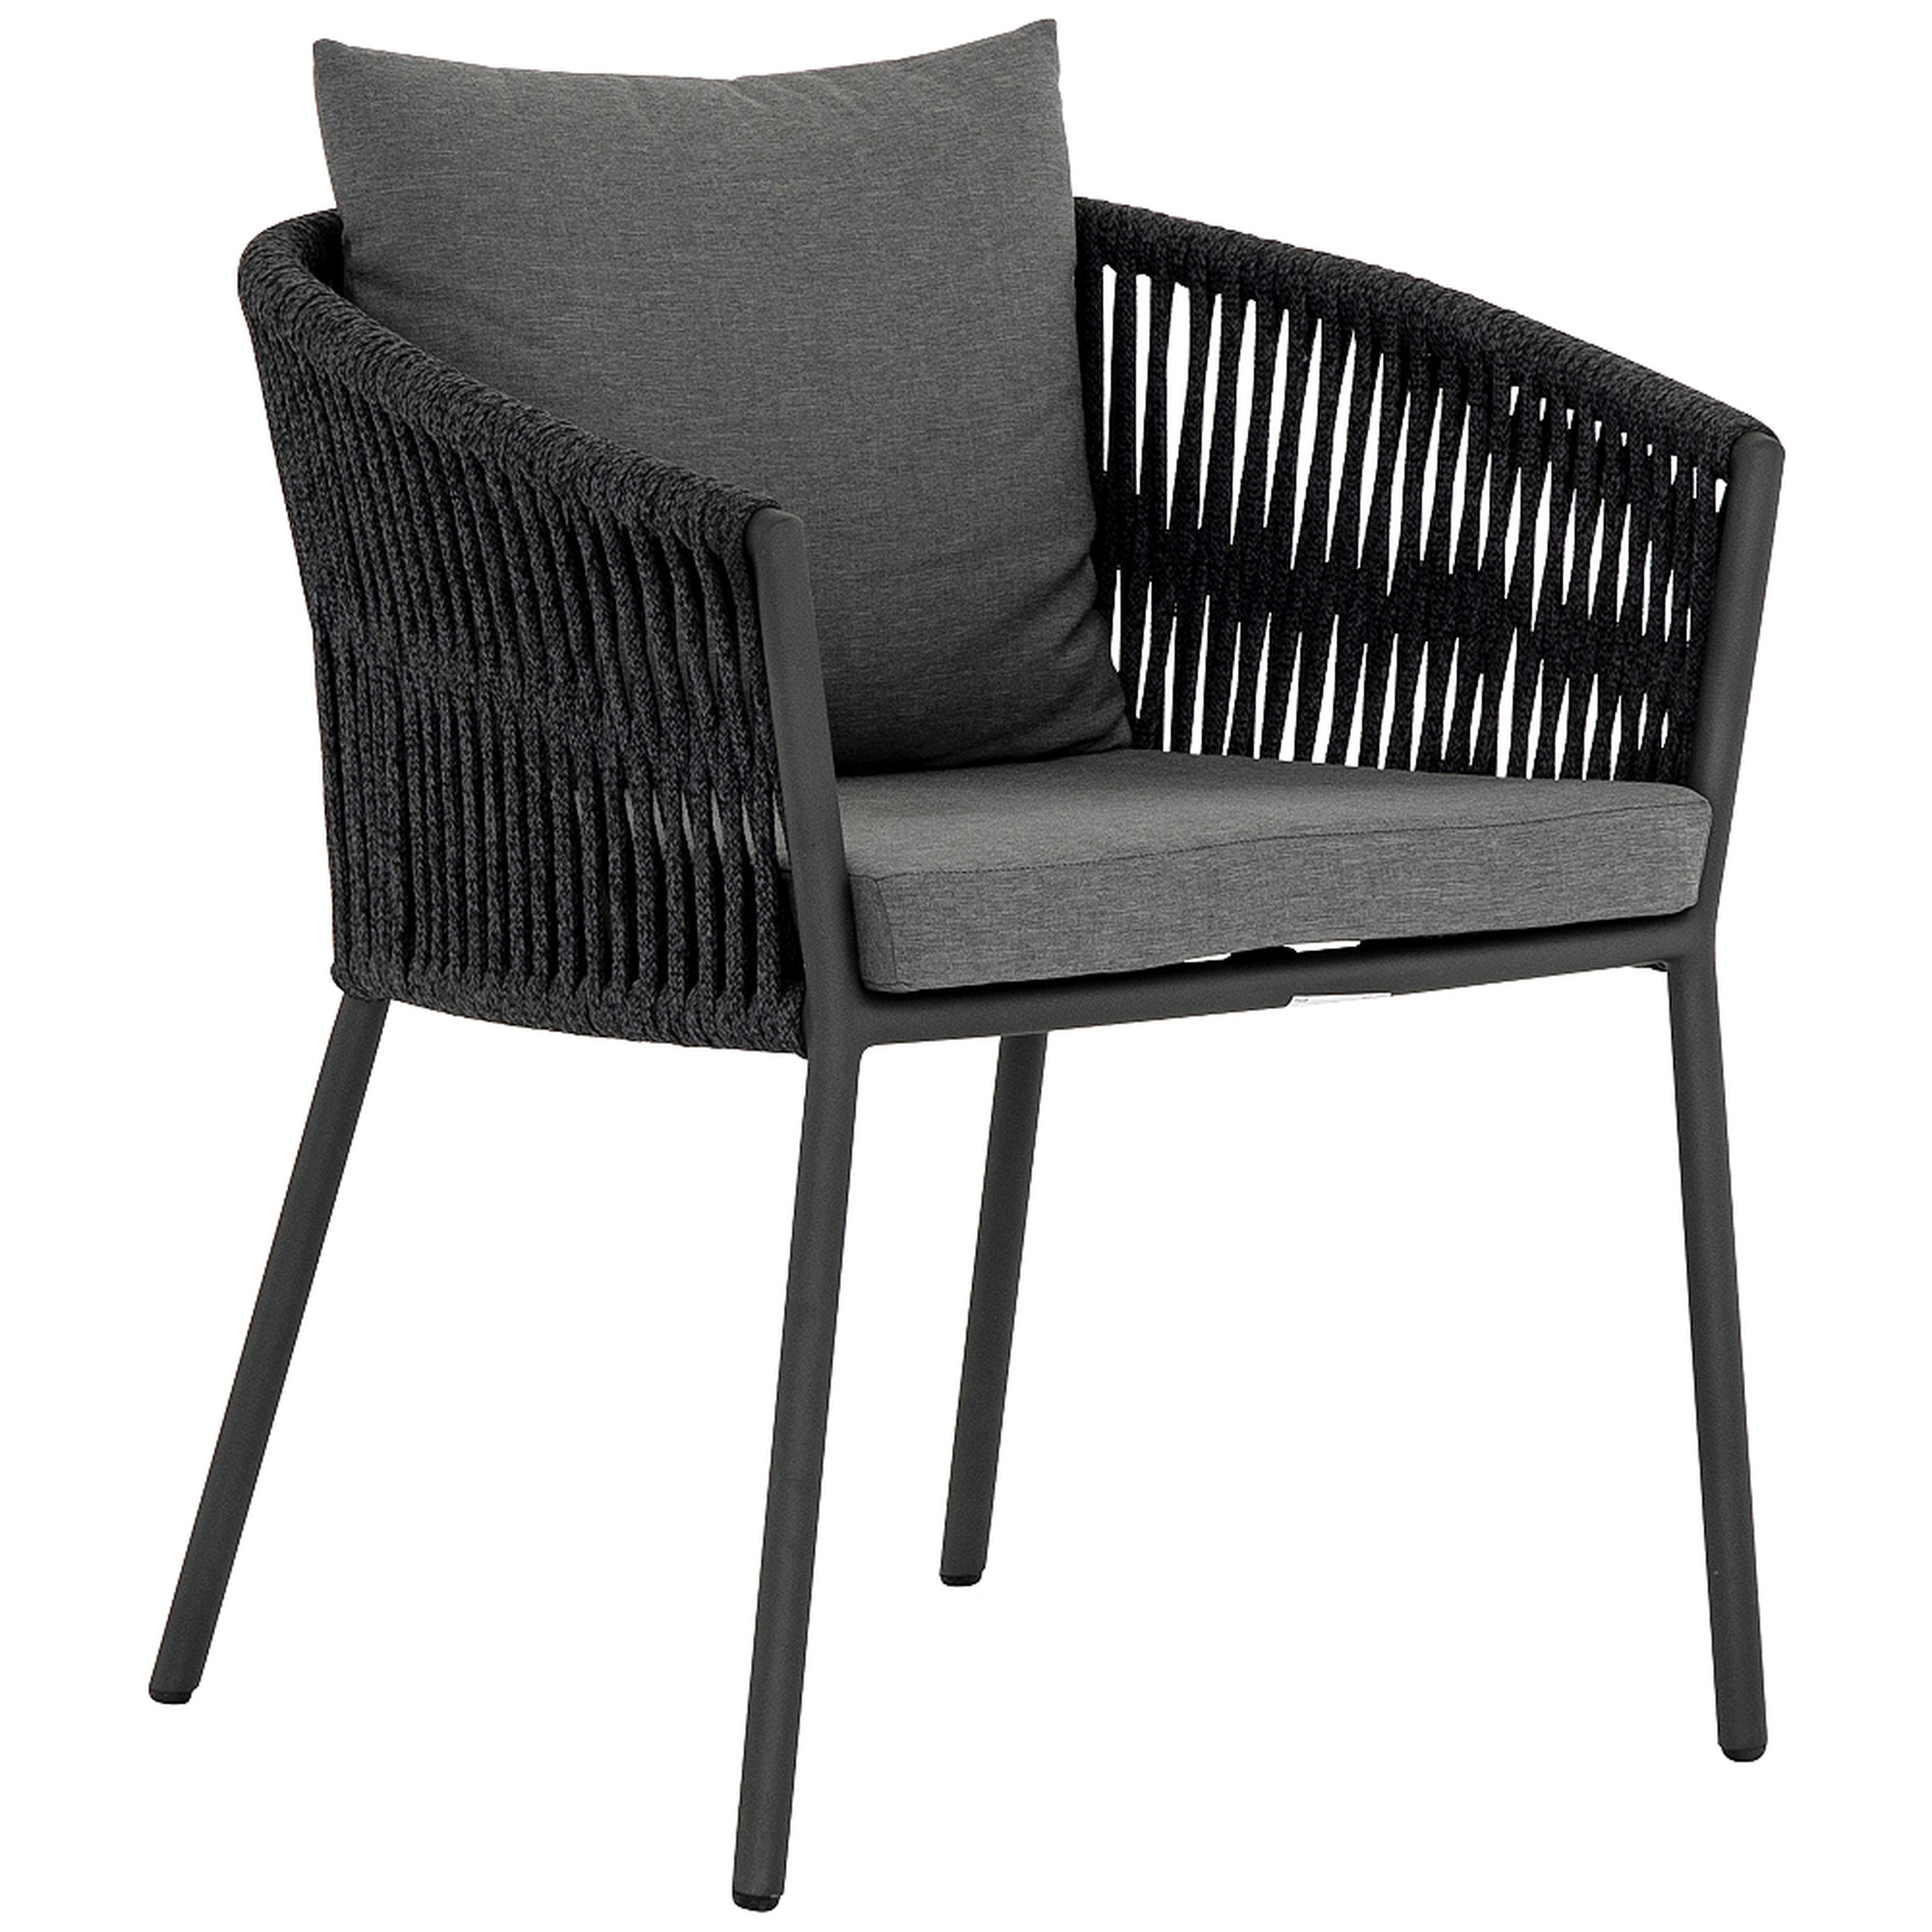 Porto Charcoal and Bronze Outdoor Dining Chair - Style # 89J92 - Lamps Plus